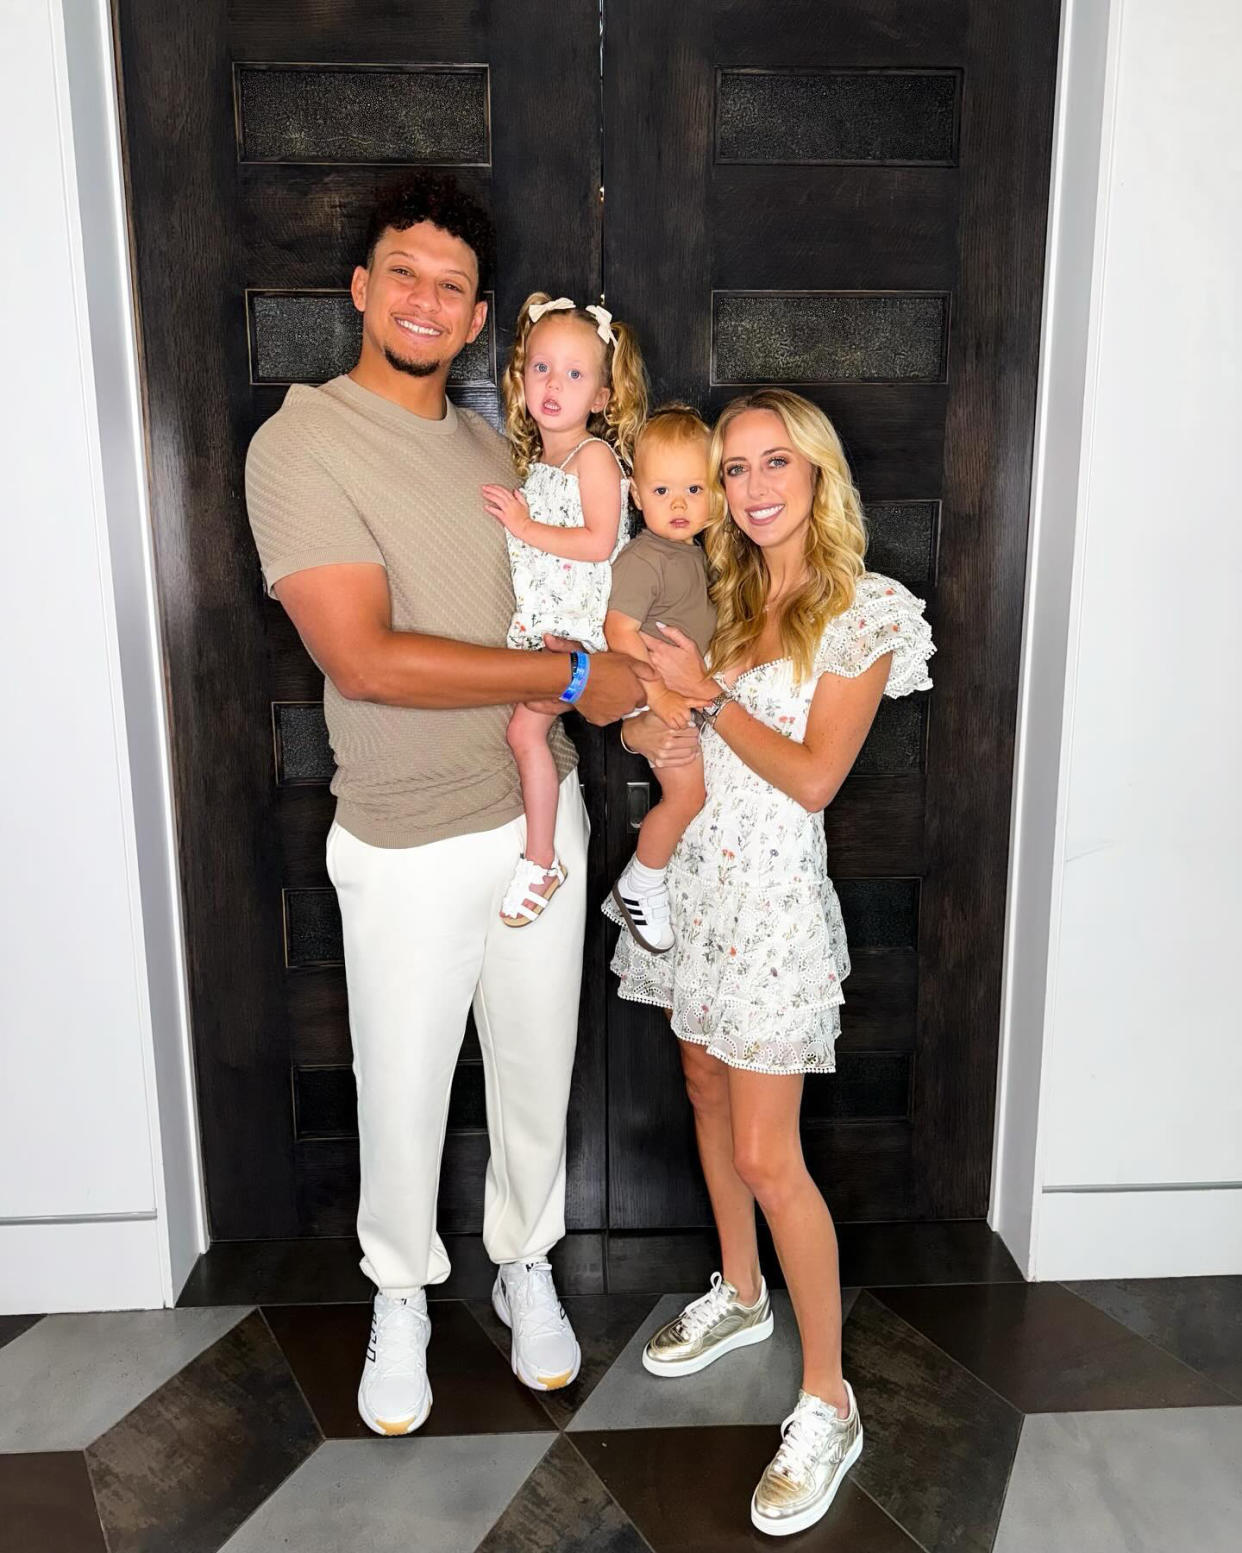 Patrick Mahomes Pays Tribute to Wife Britanny on Mother's Day